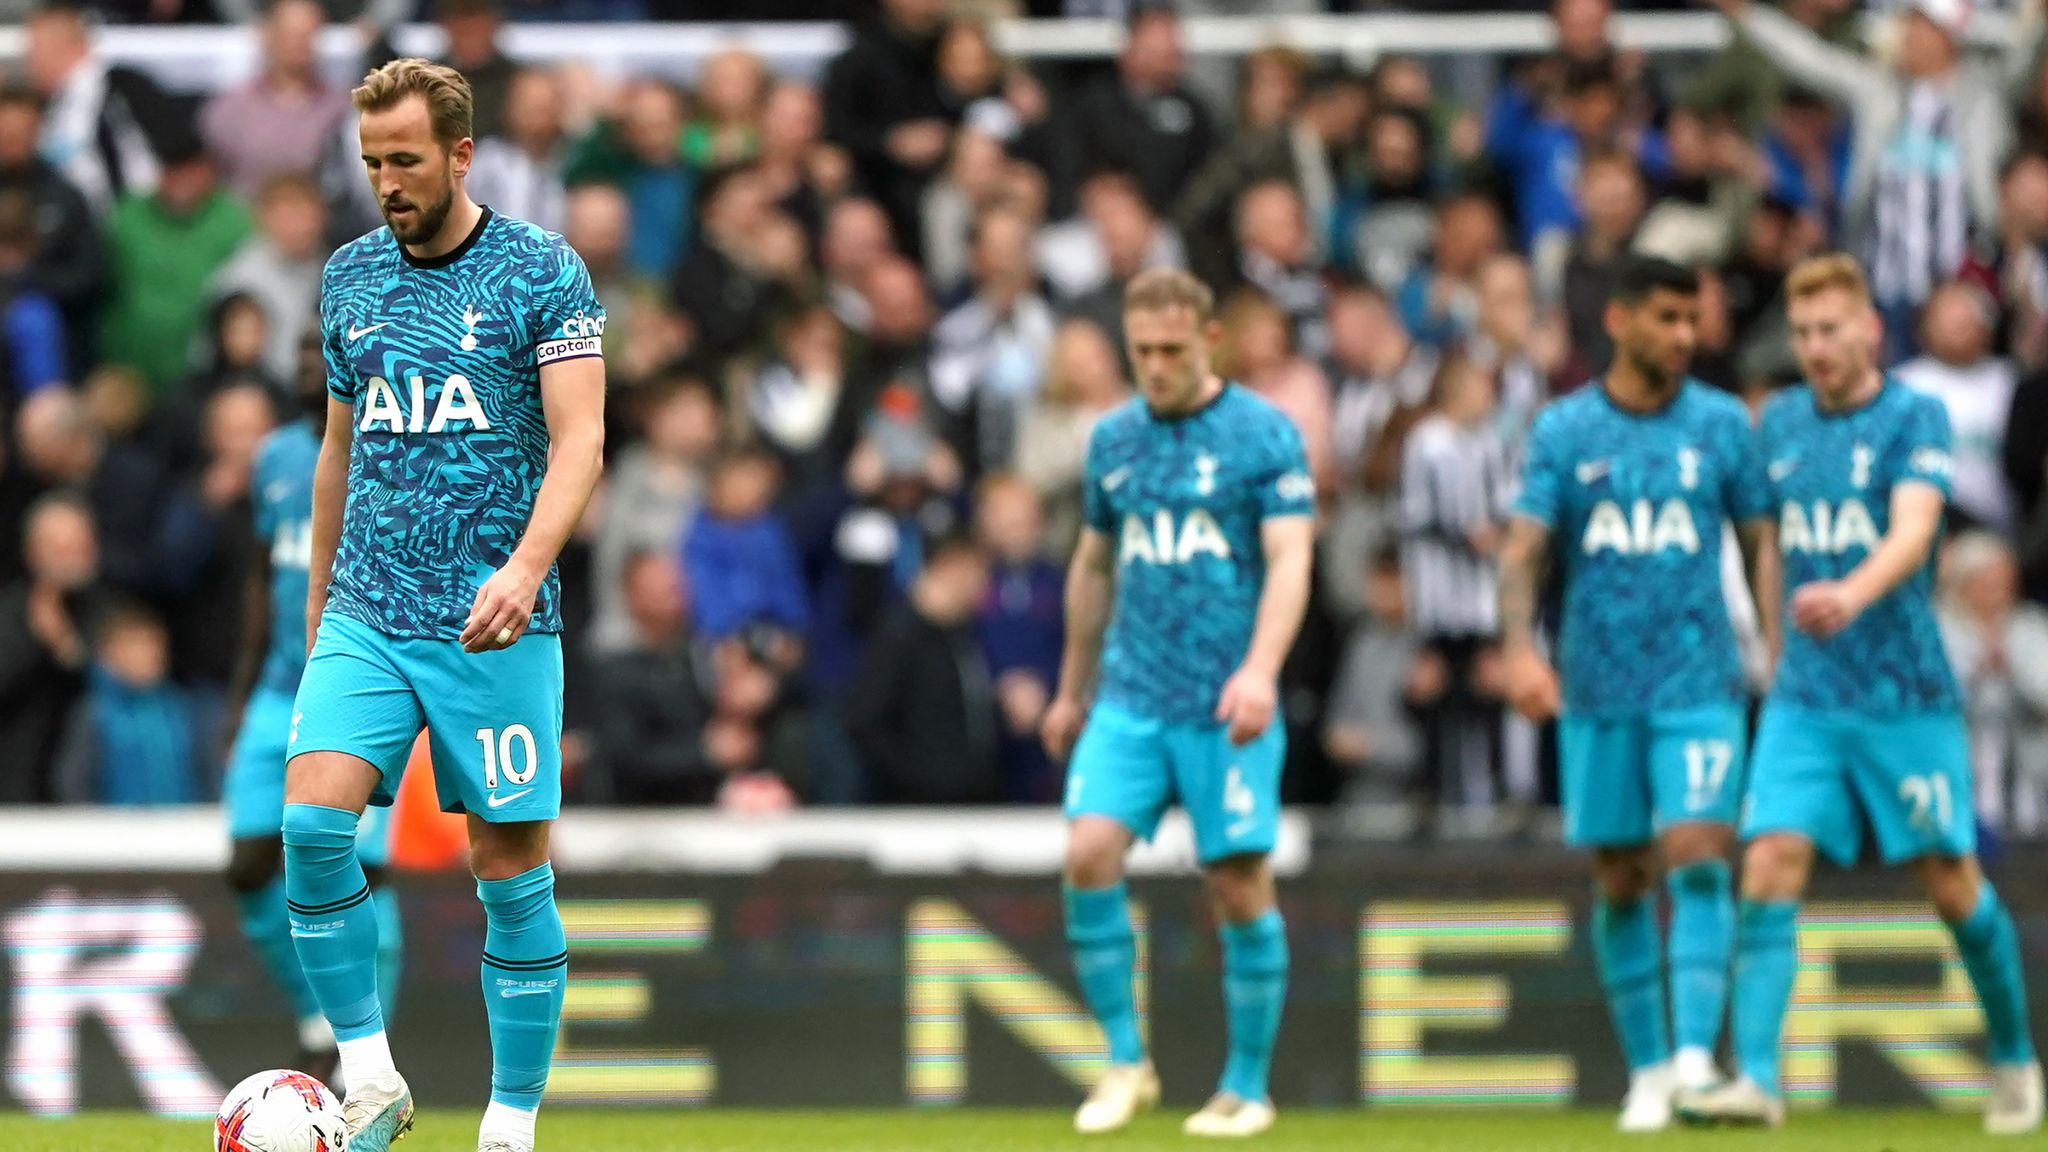 Tottenham players to reimburse fans after 'wholly unacceptable' performance  in 6-1 defeat to Newcastle | UK News | Sky News